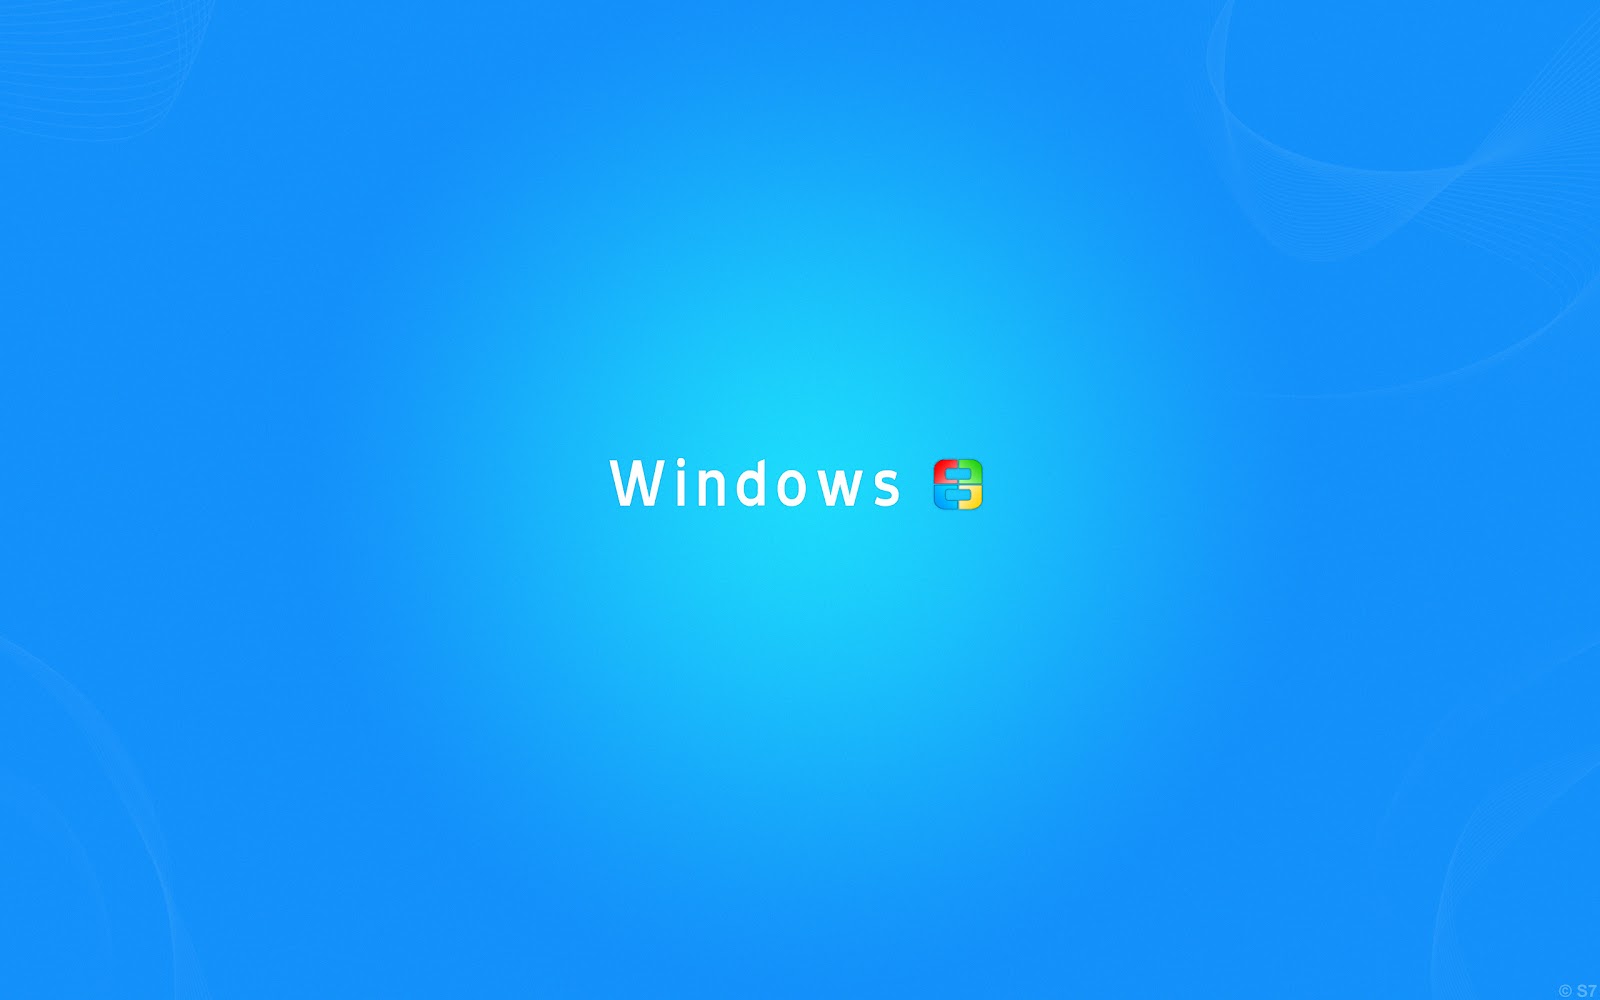 These Windows High Quality Wallpaper For Desktop Use To Set